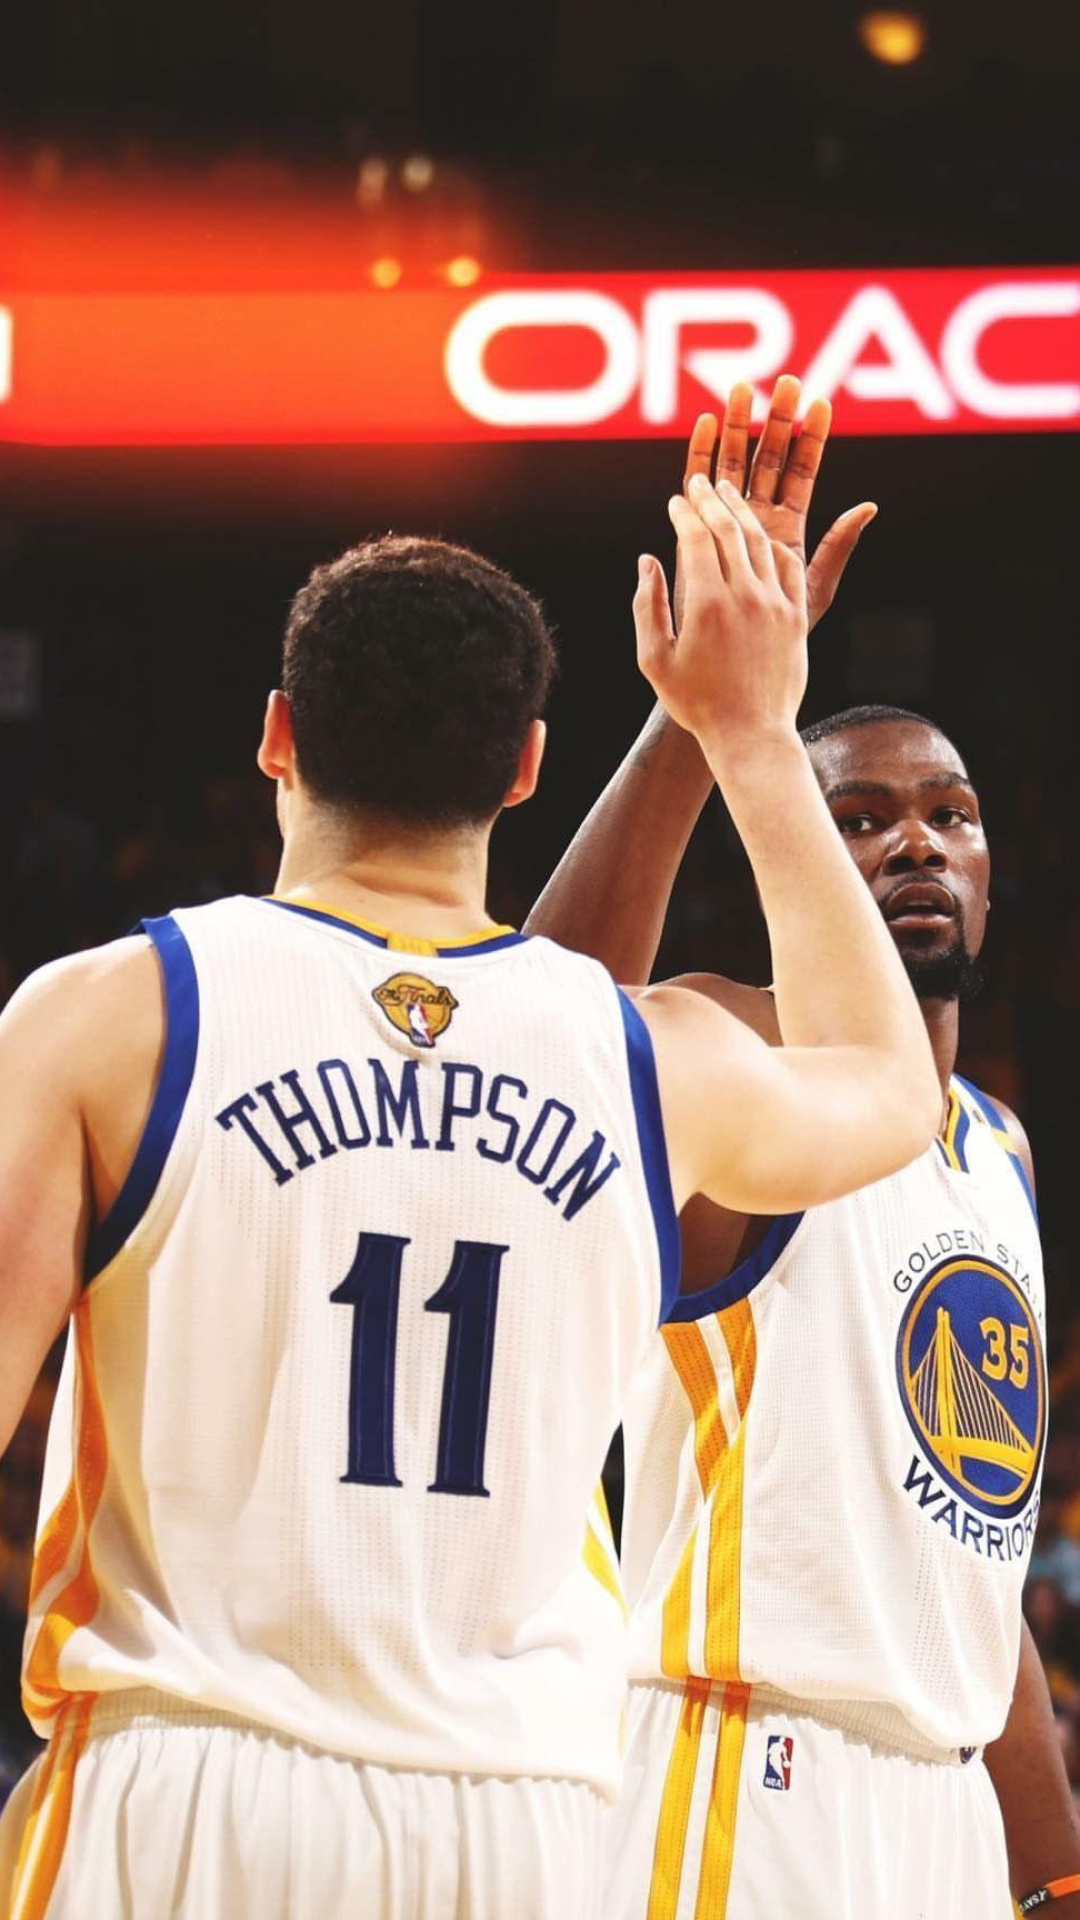 Klay Thompson, Full HD wallpapers, Photos images, Pictures, 1080x1920 Full HD Handy